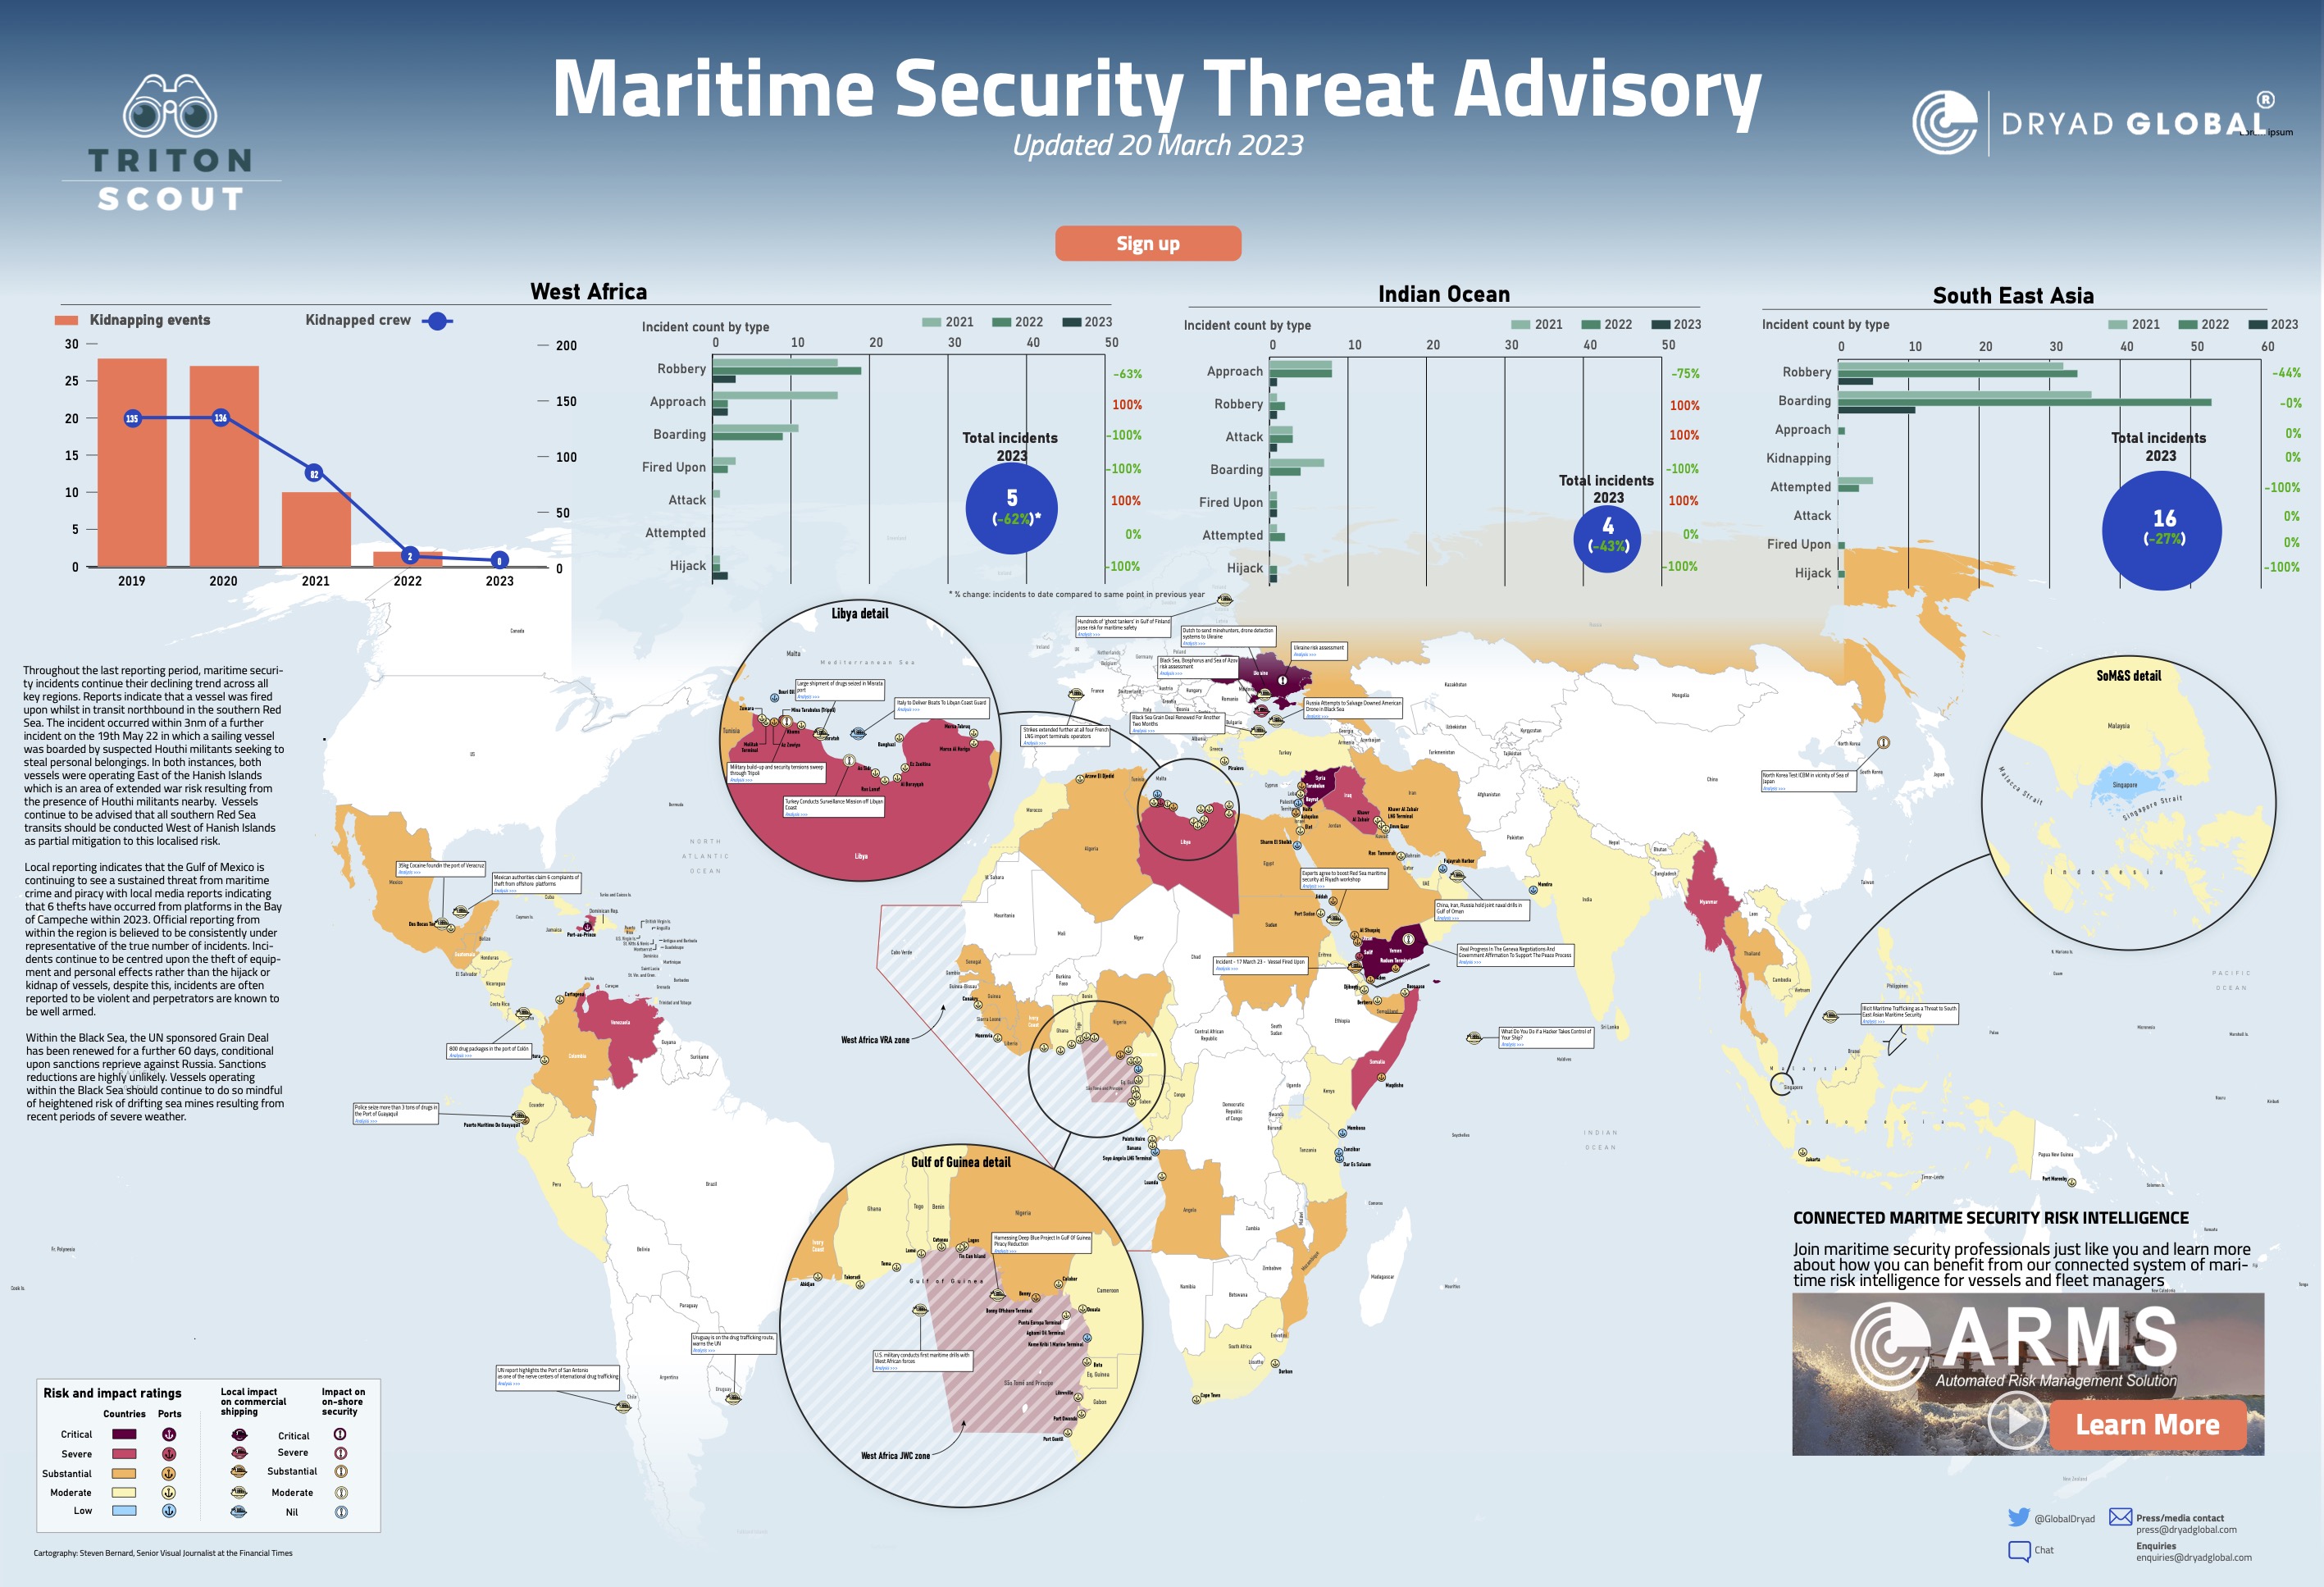 Piracy trends and high risk areas